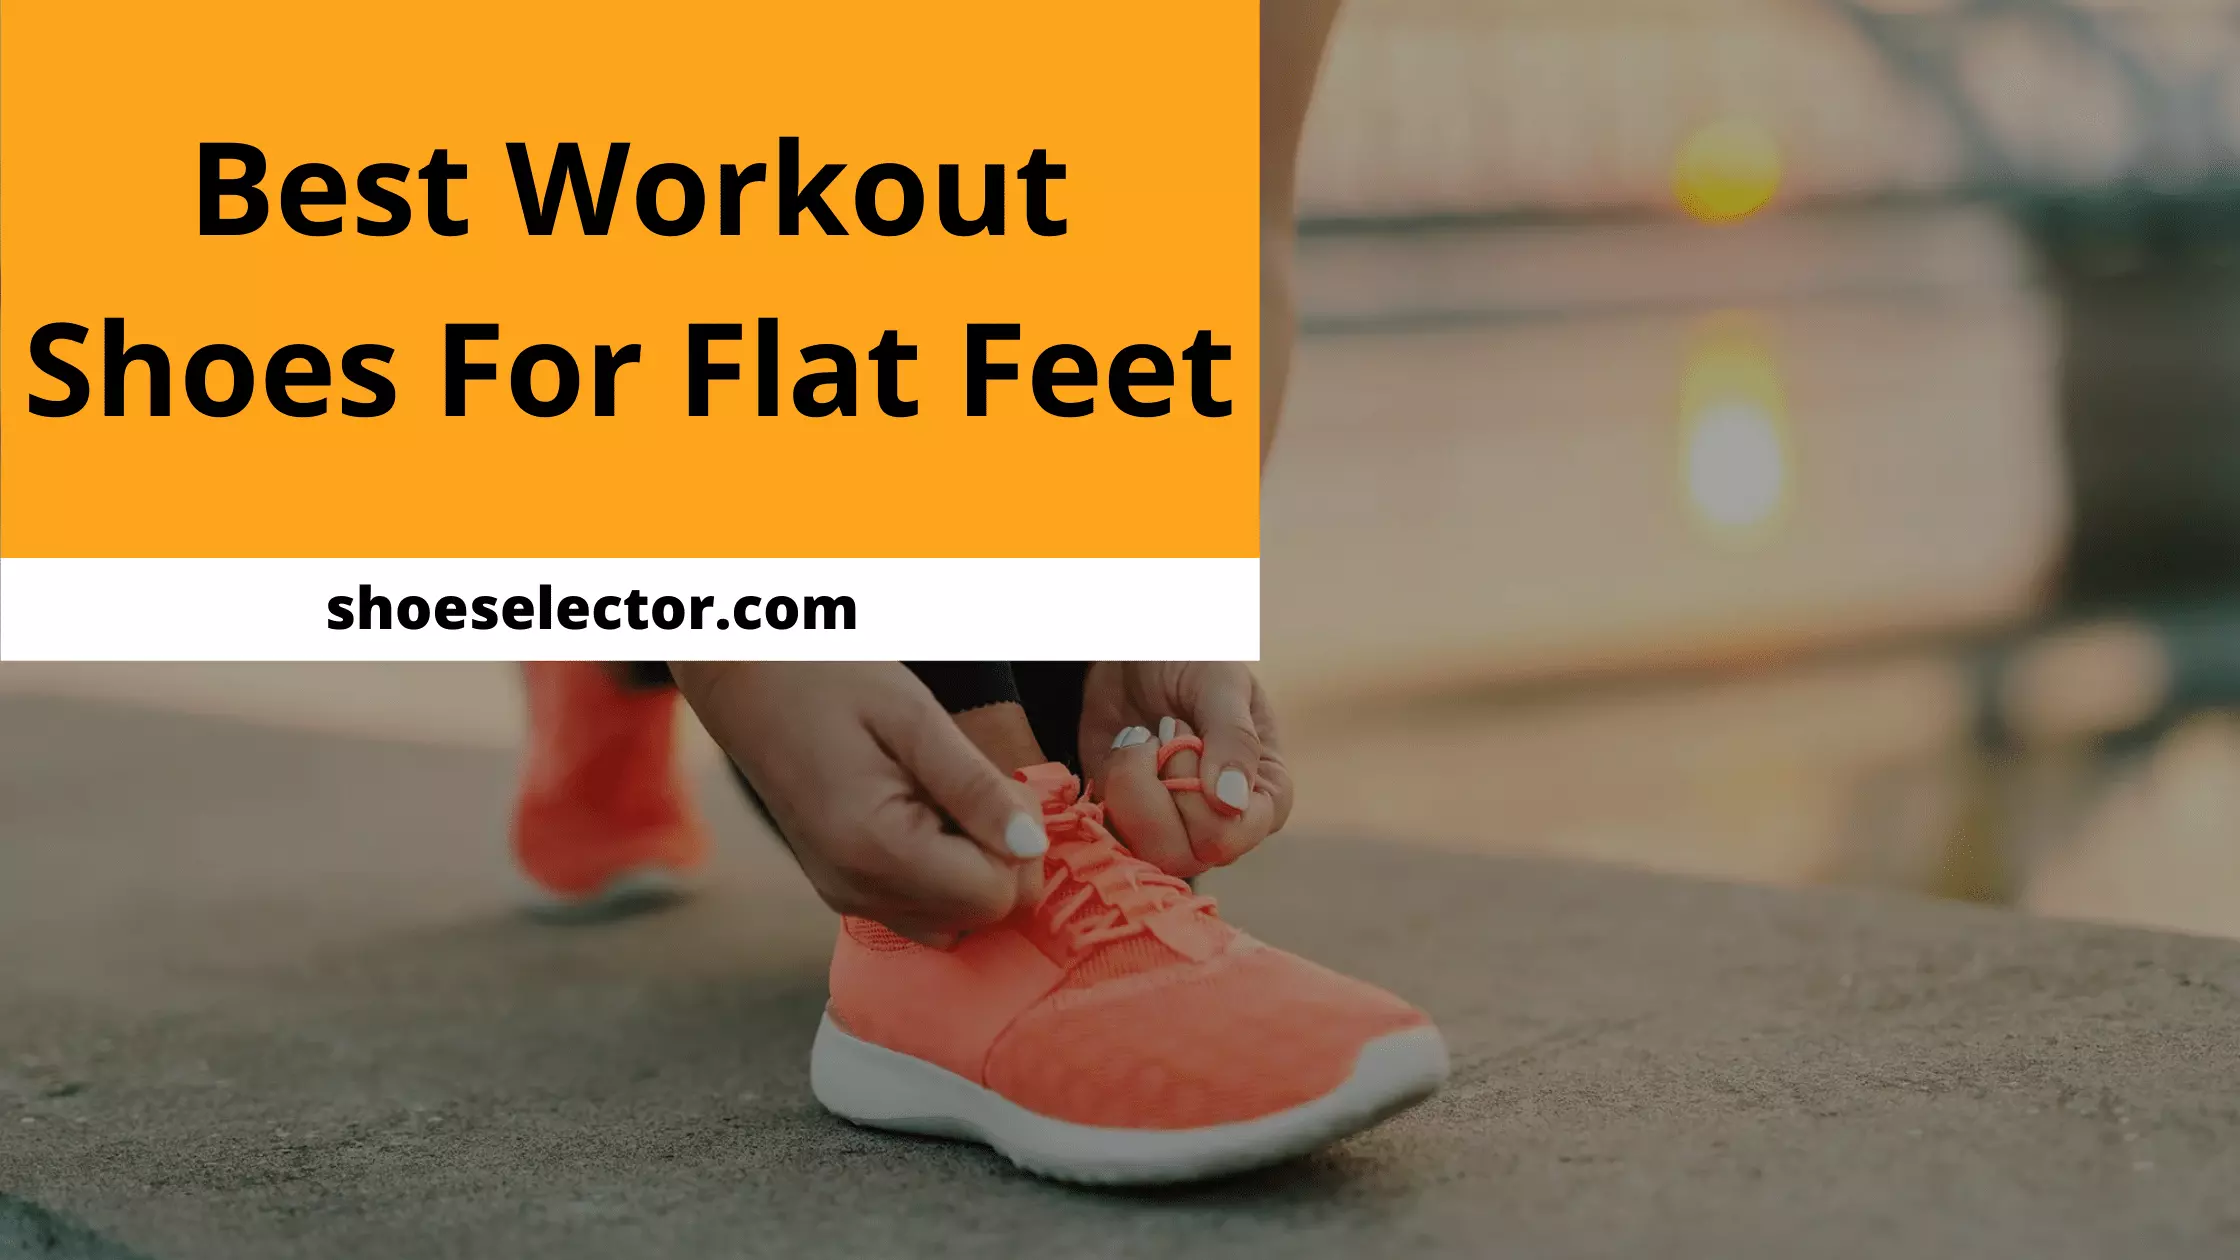 Best Workout Shoes For Flat Feet With Shopping Tips